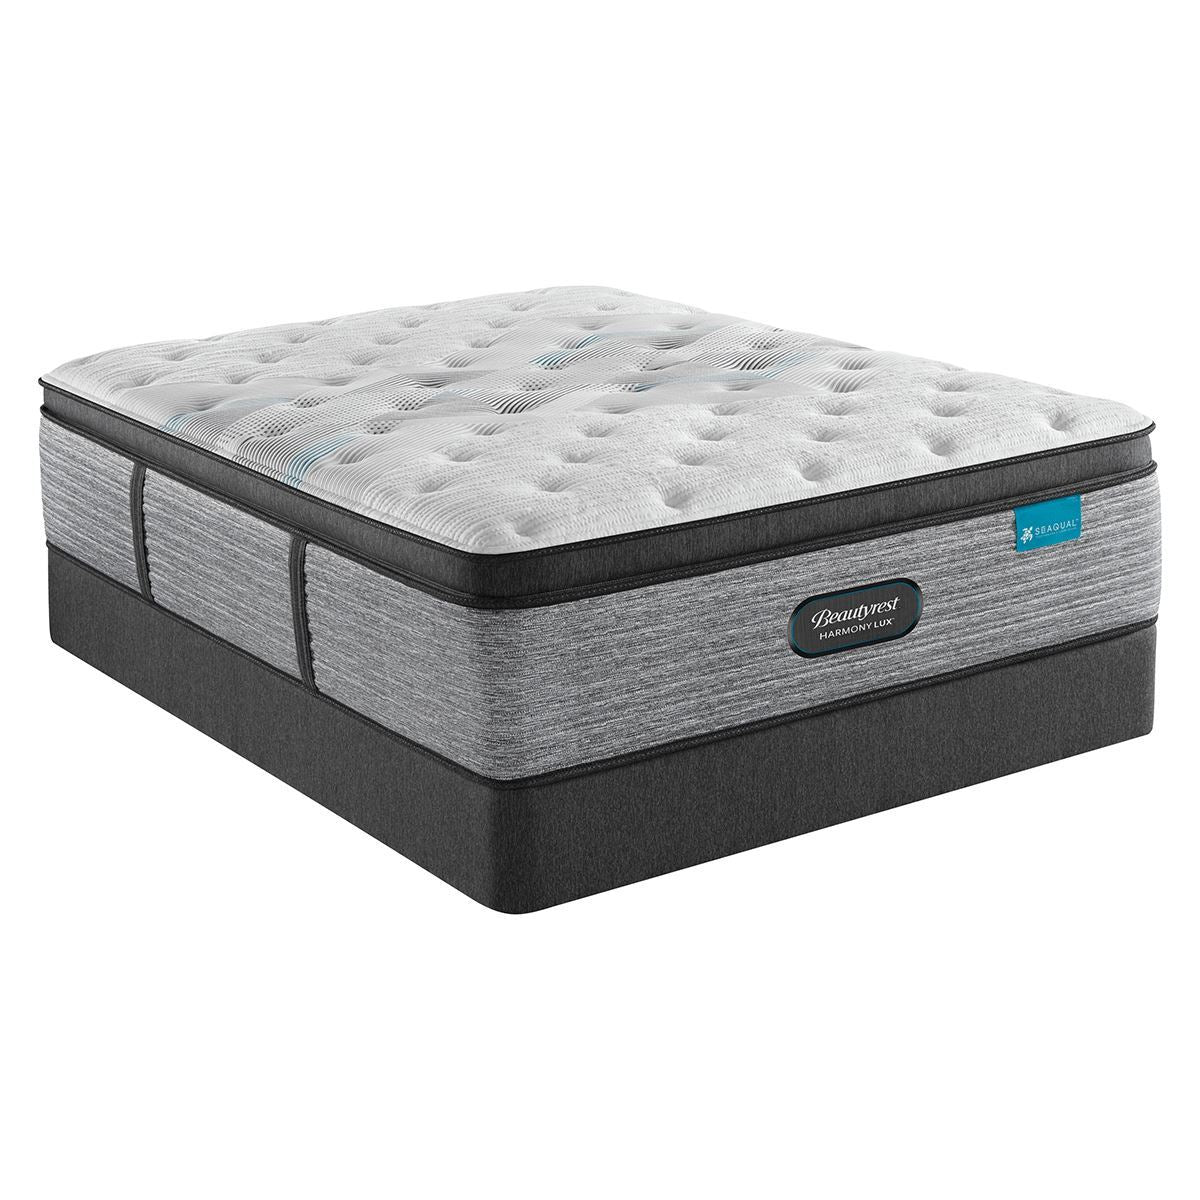 Beautyrest Harmony Lux Carbon Plush Pillowtop Mattress On Boxspring